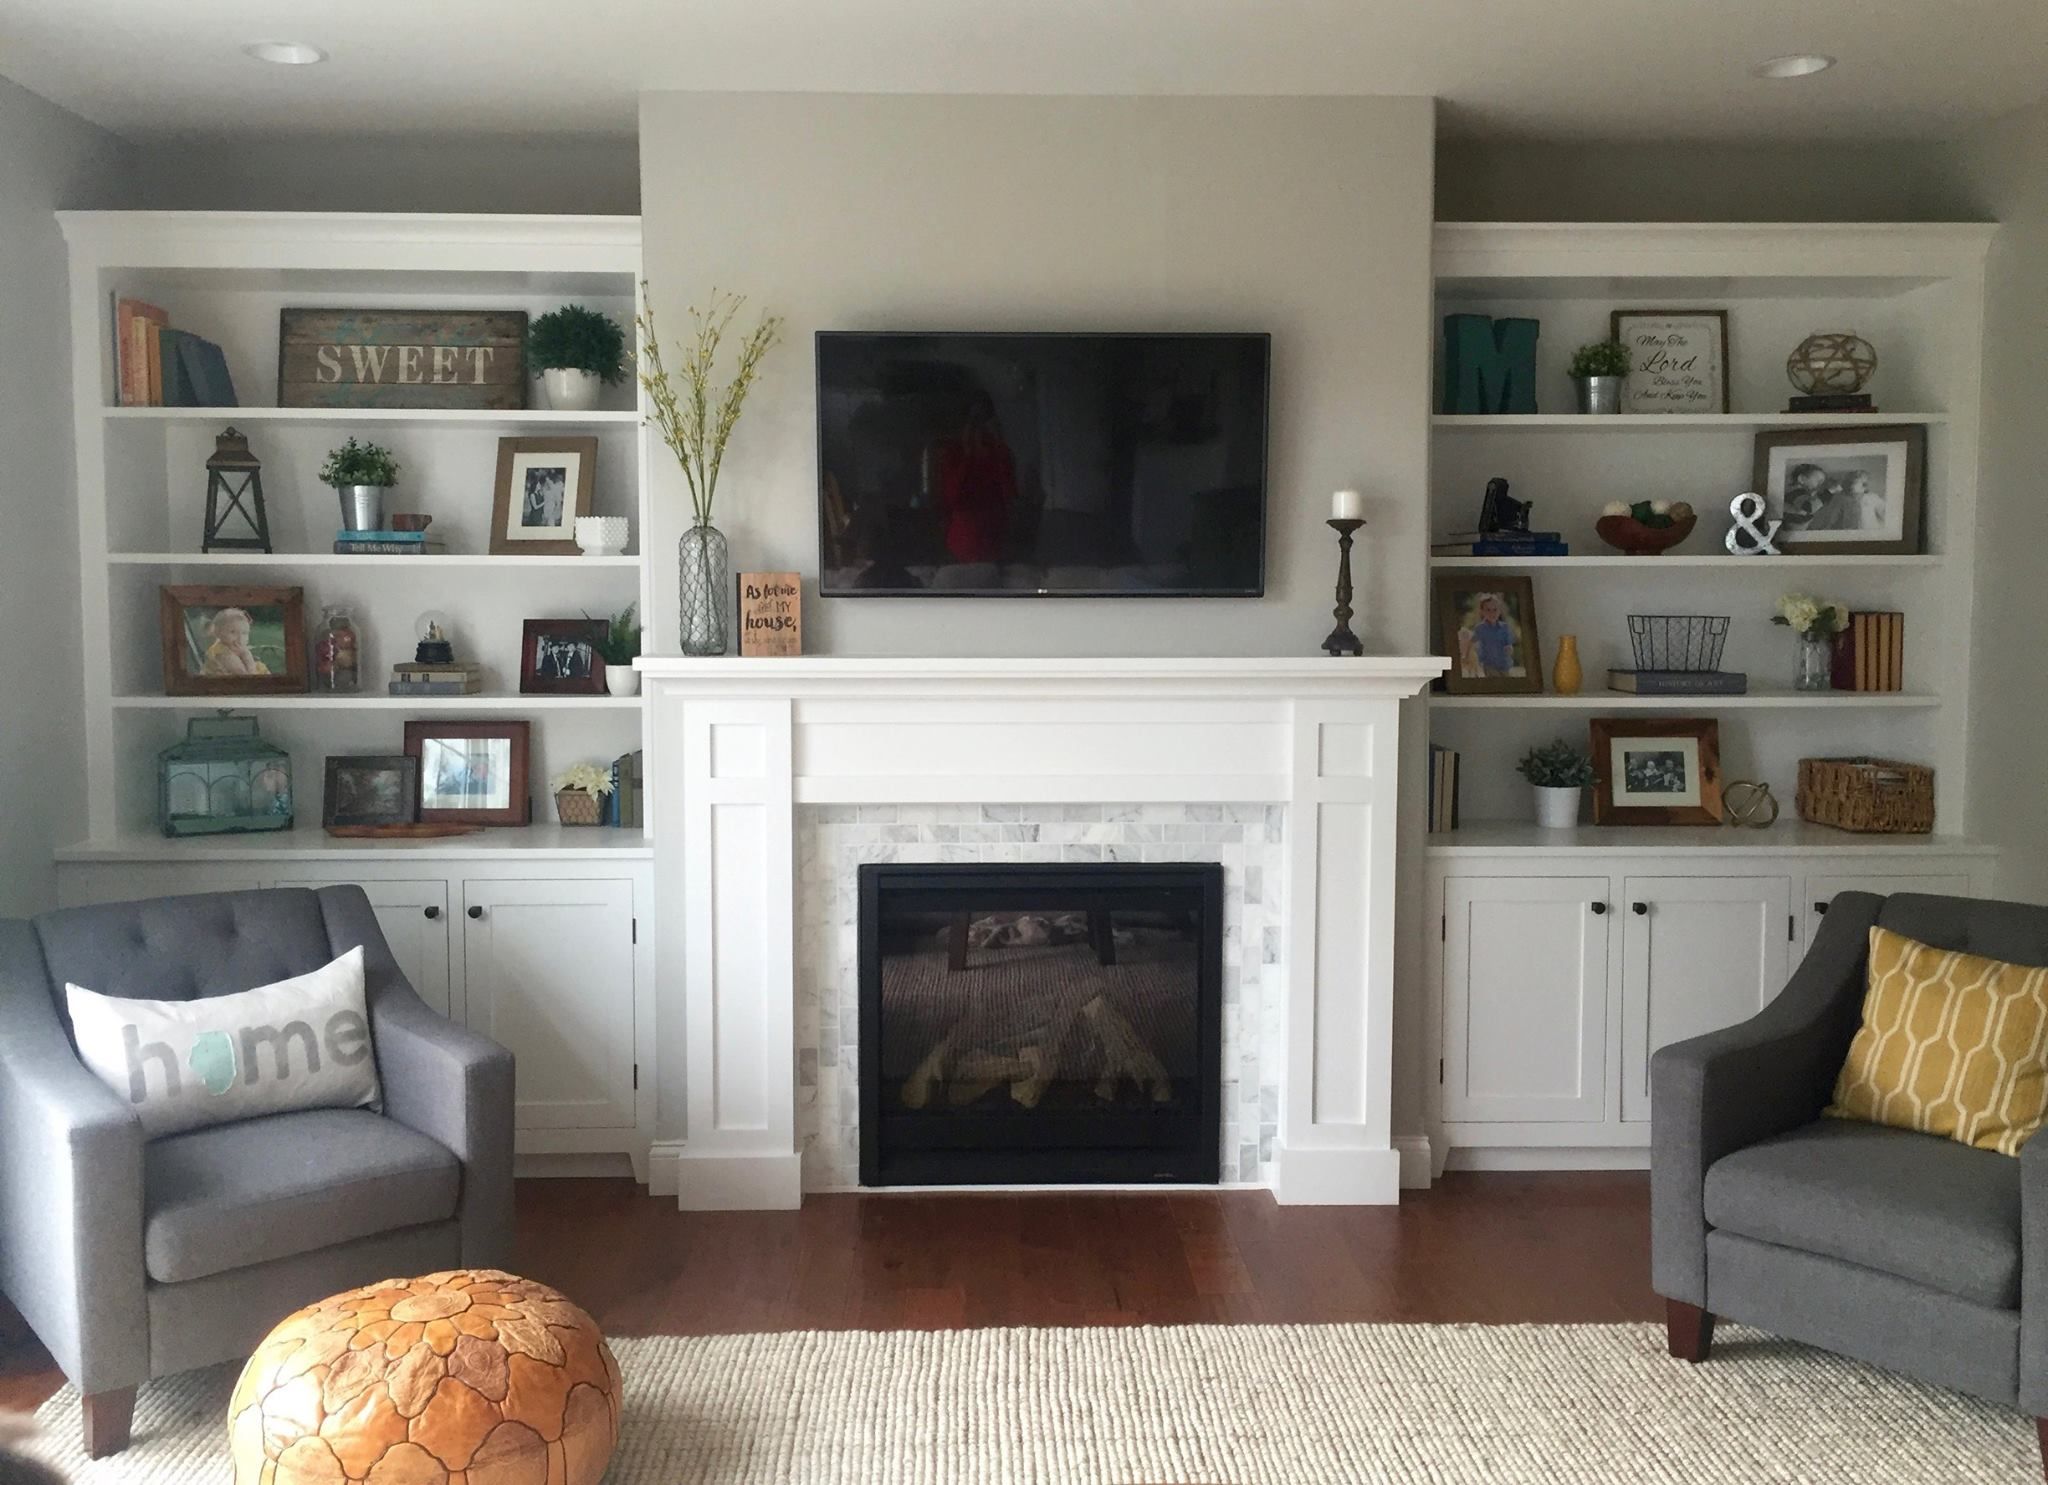 Pictures Of Fireplace Mantels Fresh Instructions to Build This Fireplace Mantel with Built In